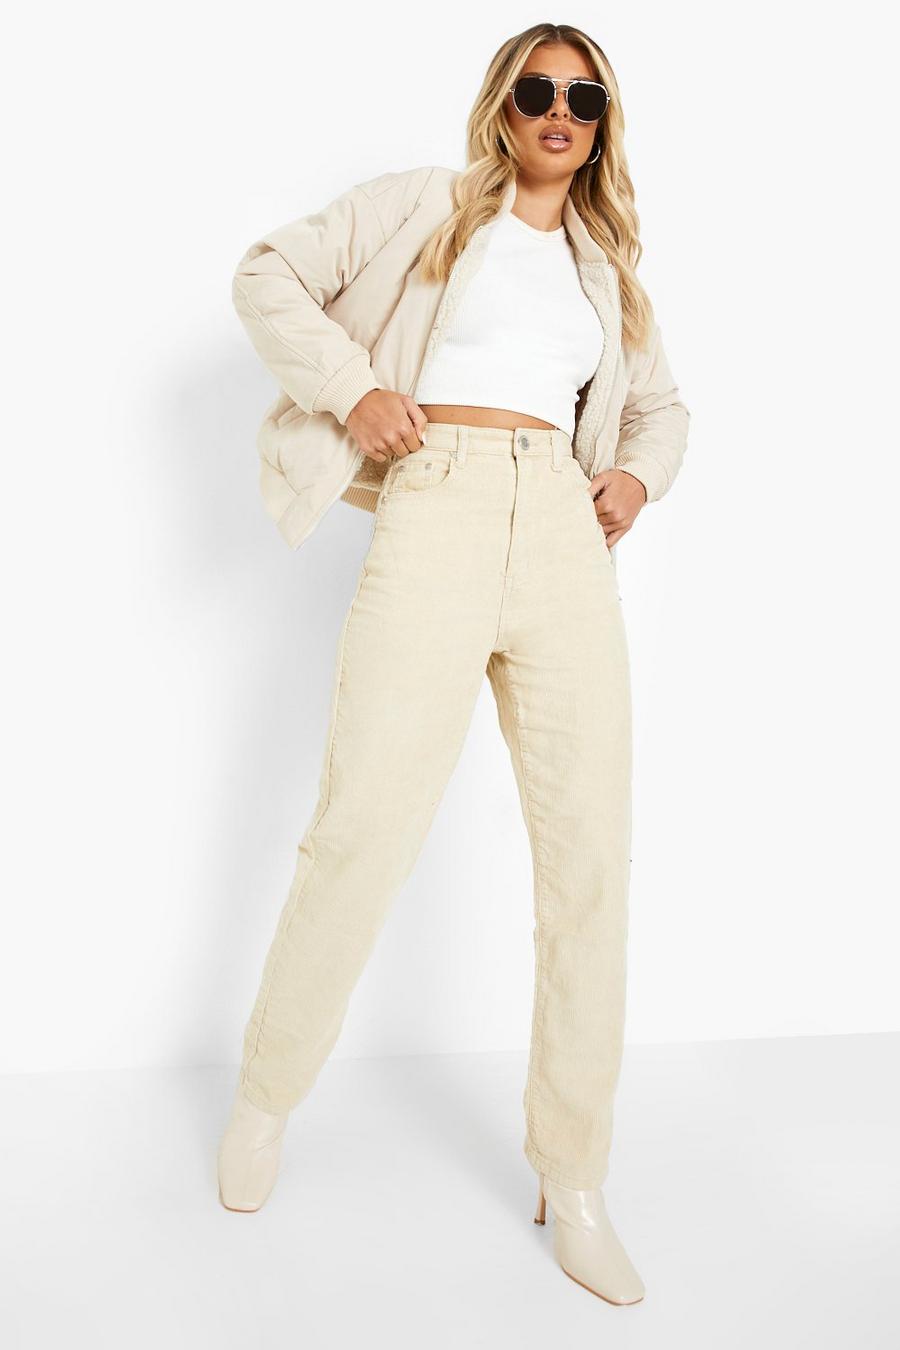 mest antenne Moralsk uddannelse Cord Relaxed Straight Leg Jeans | boohoo